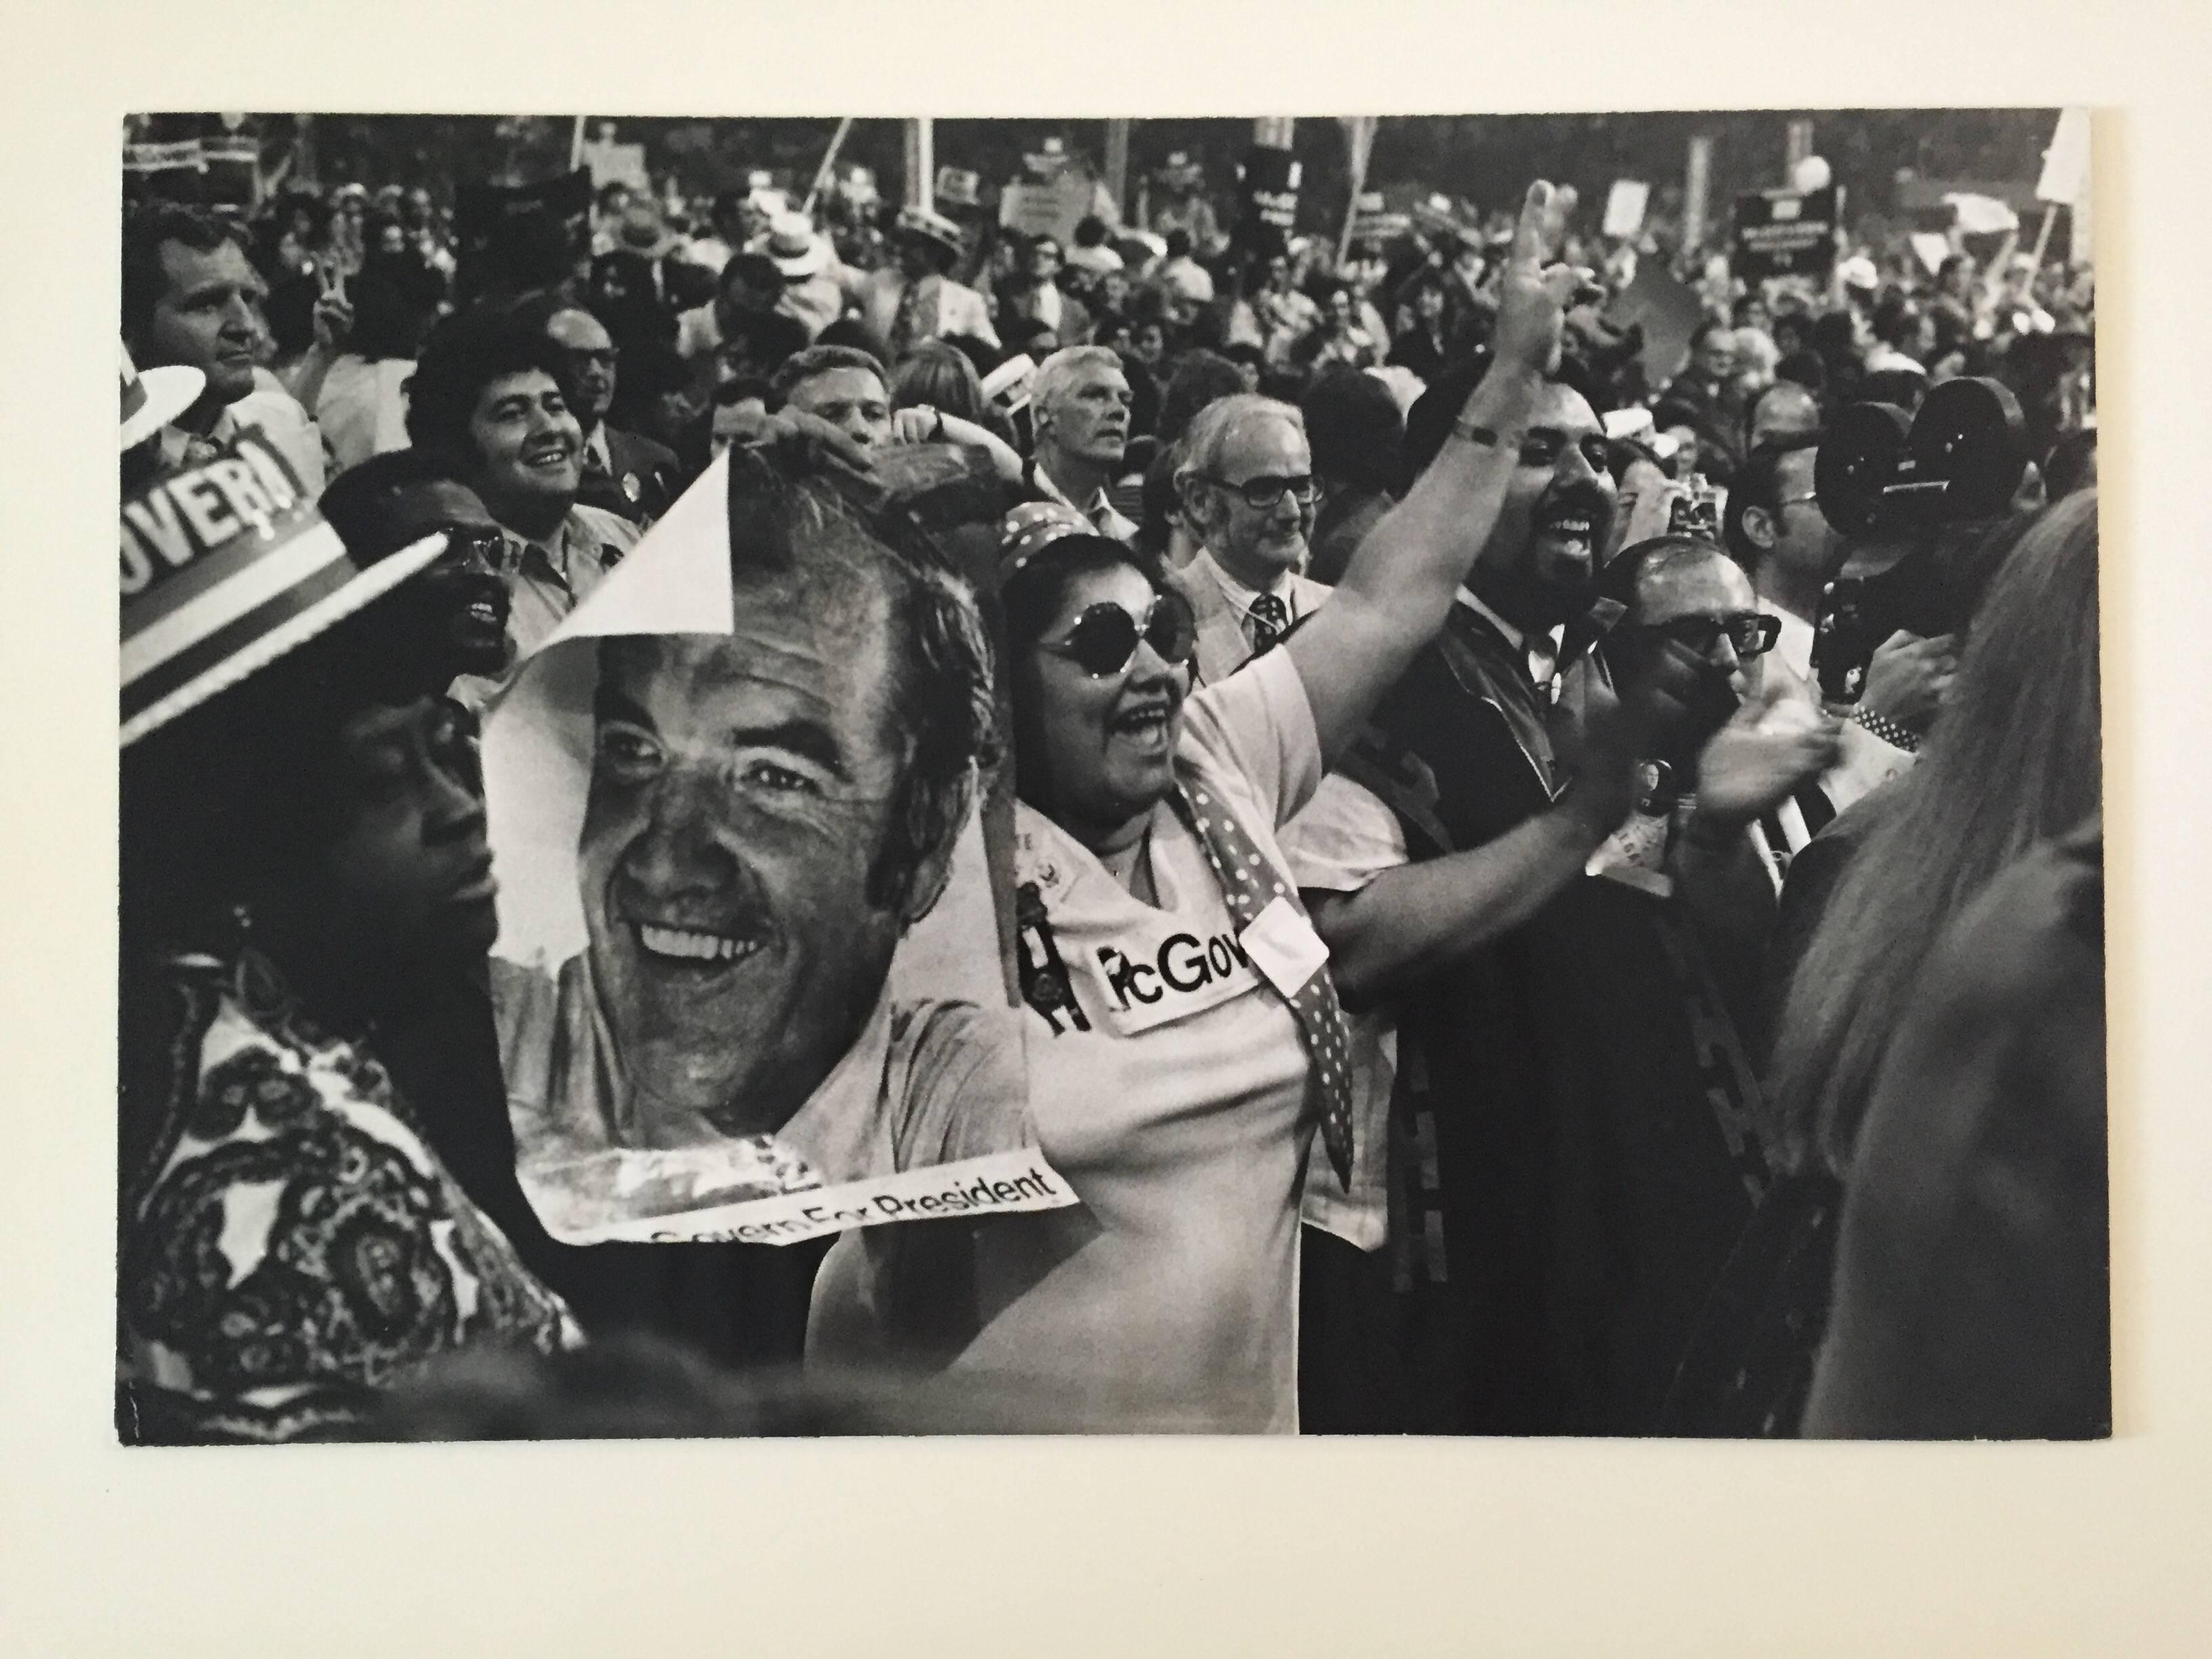 Supporters of George McGovern for President - Photograph by Fred McDarrah